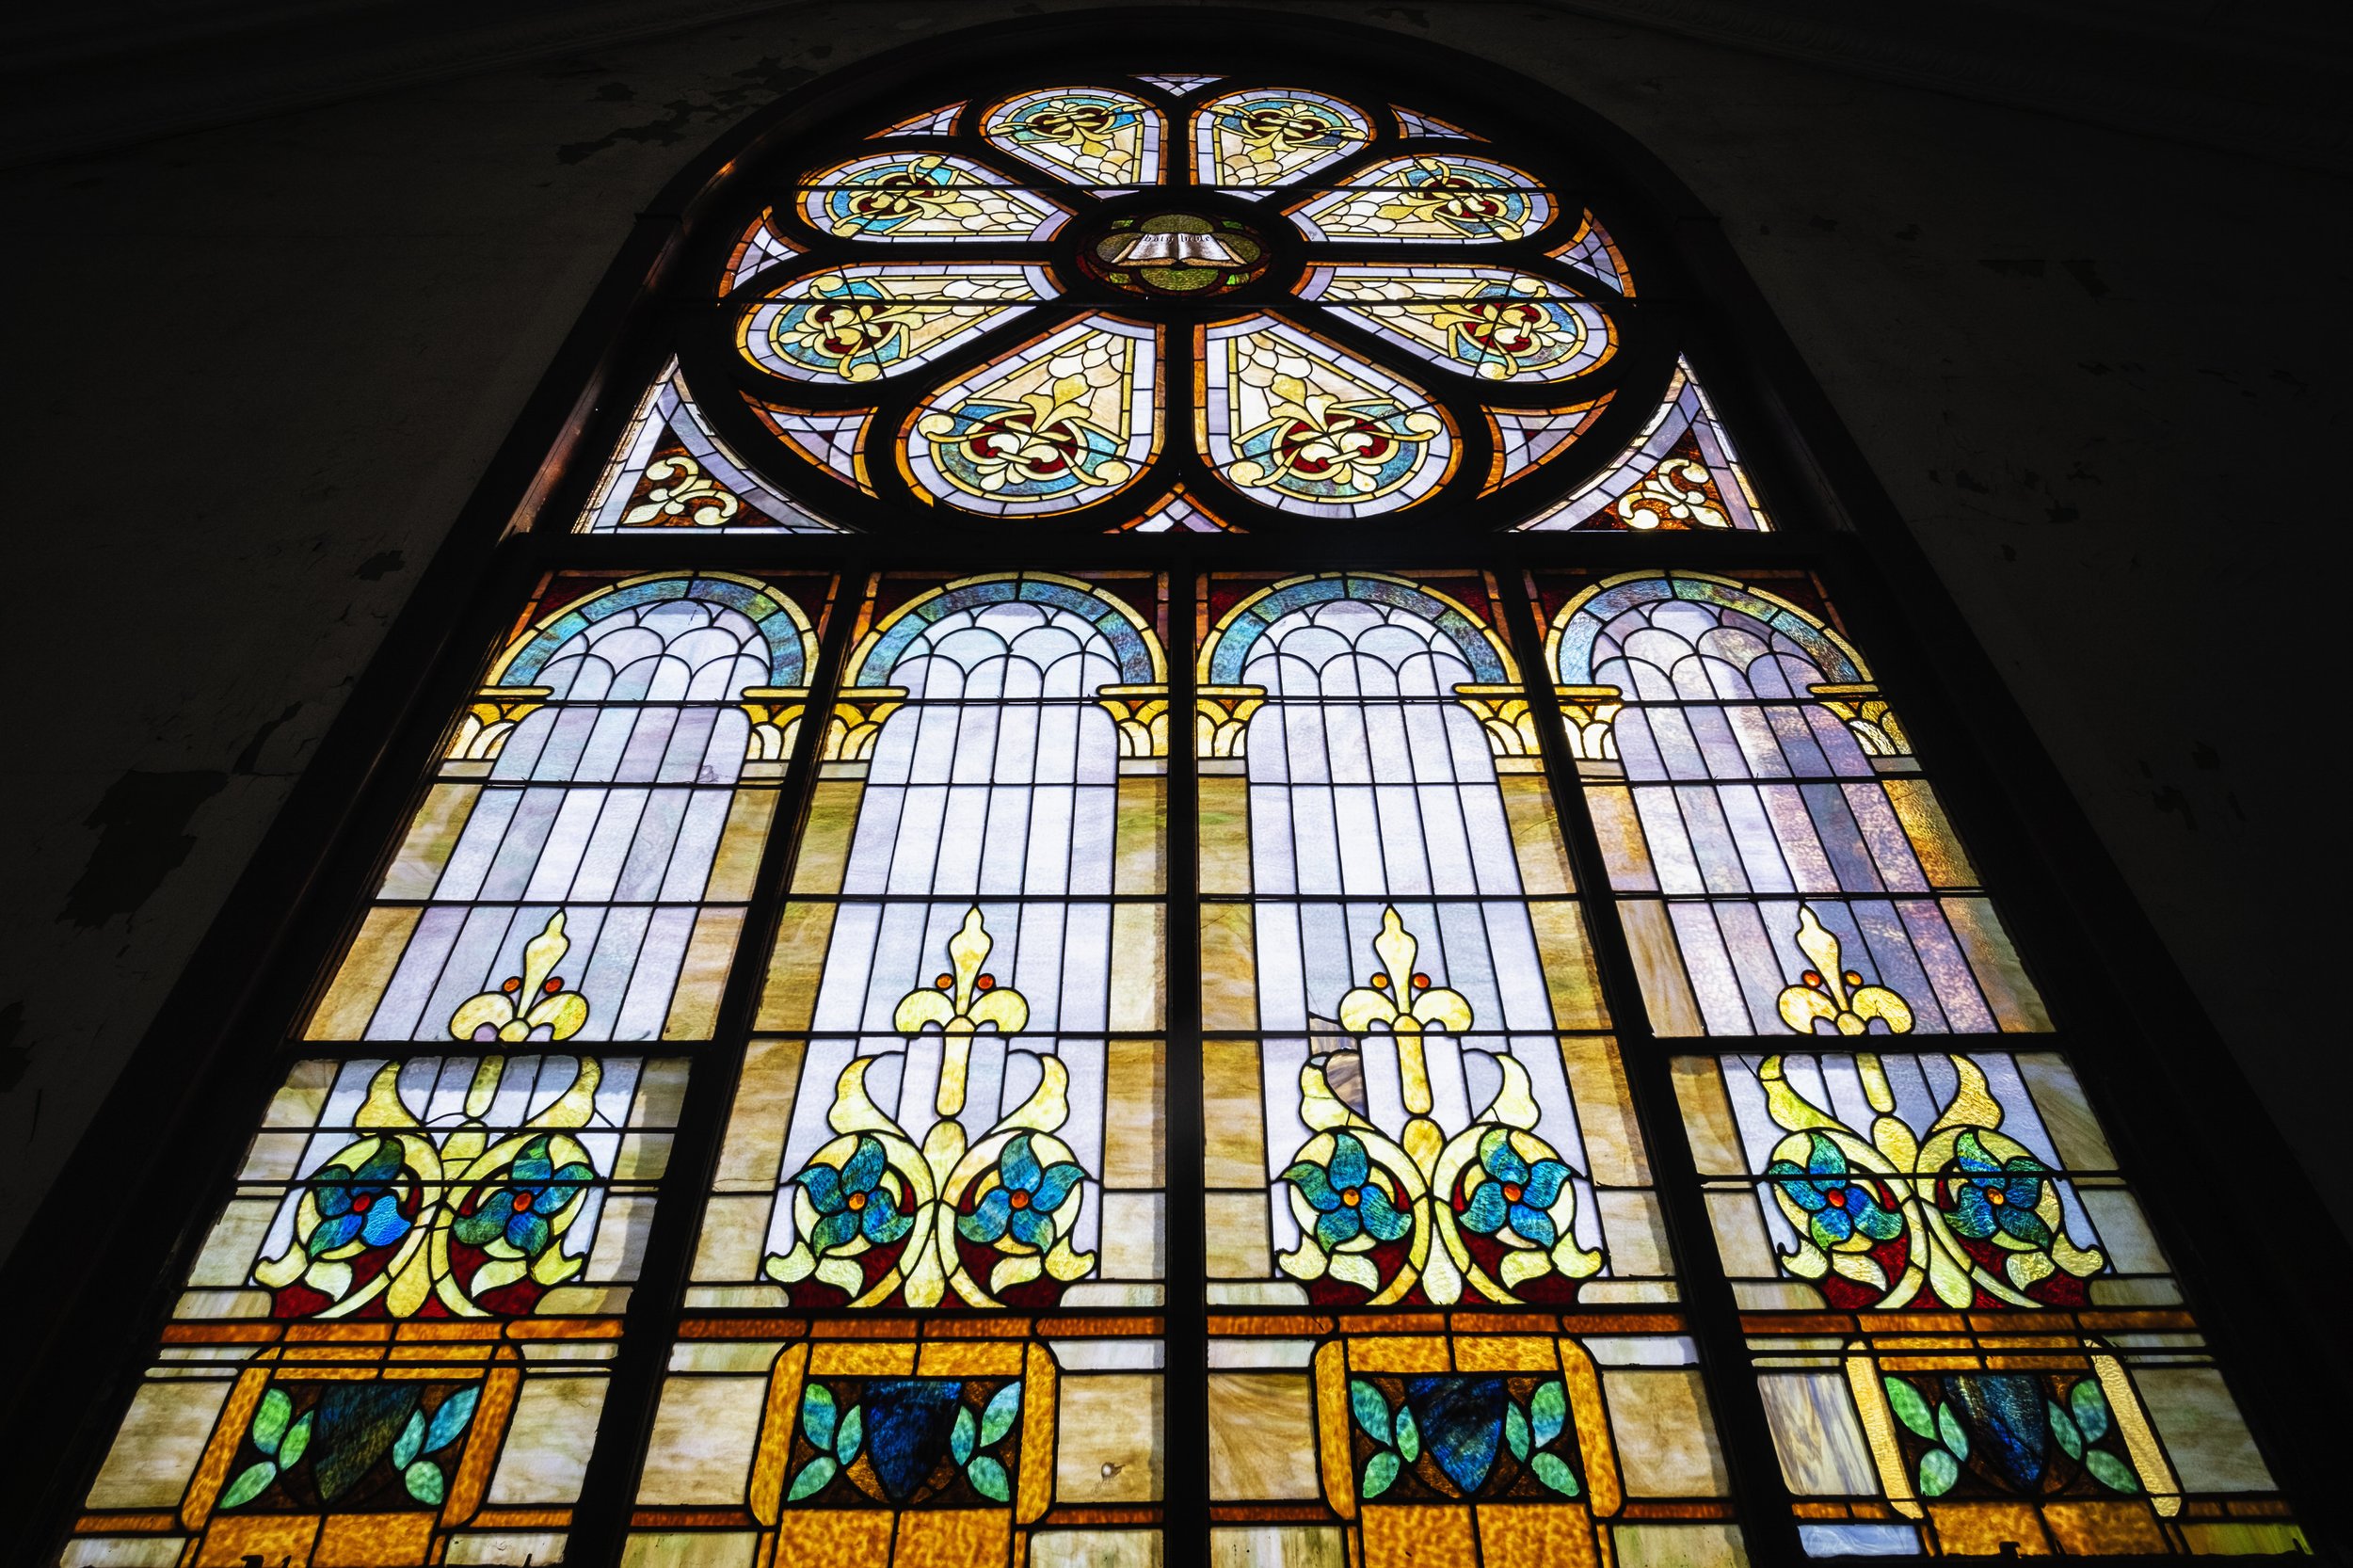  Stained glass windows are seen inside Mount Zion Baptist Church in Athens, Ohio Thursday April 20, 2023. According to Mount Zion Baptist Church Preservation Society, the church was built with funds and land contributed by Black hotelier Edward Berry